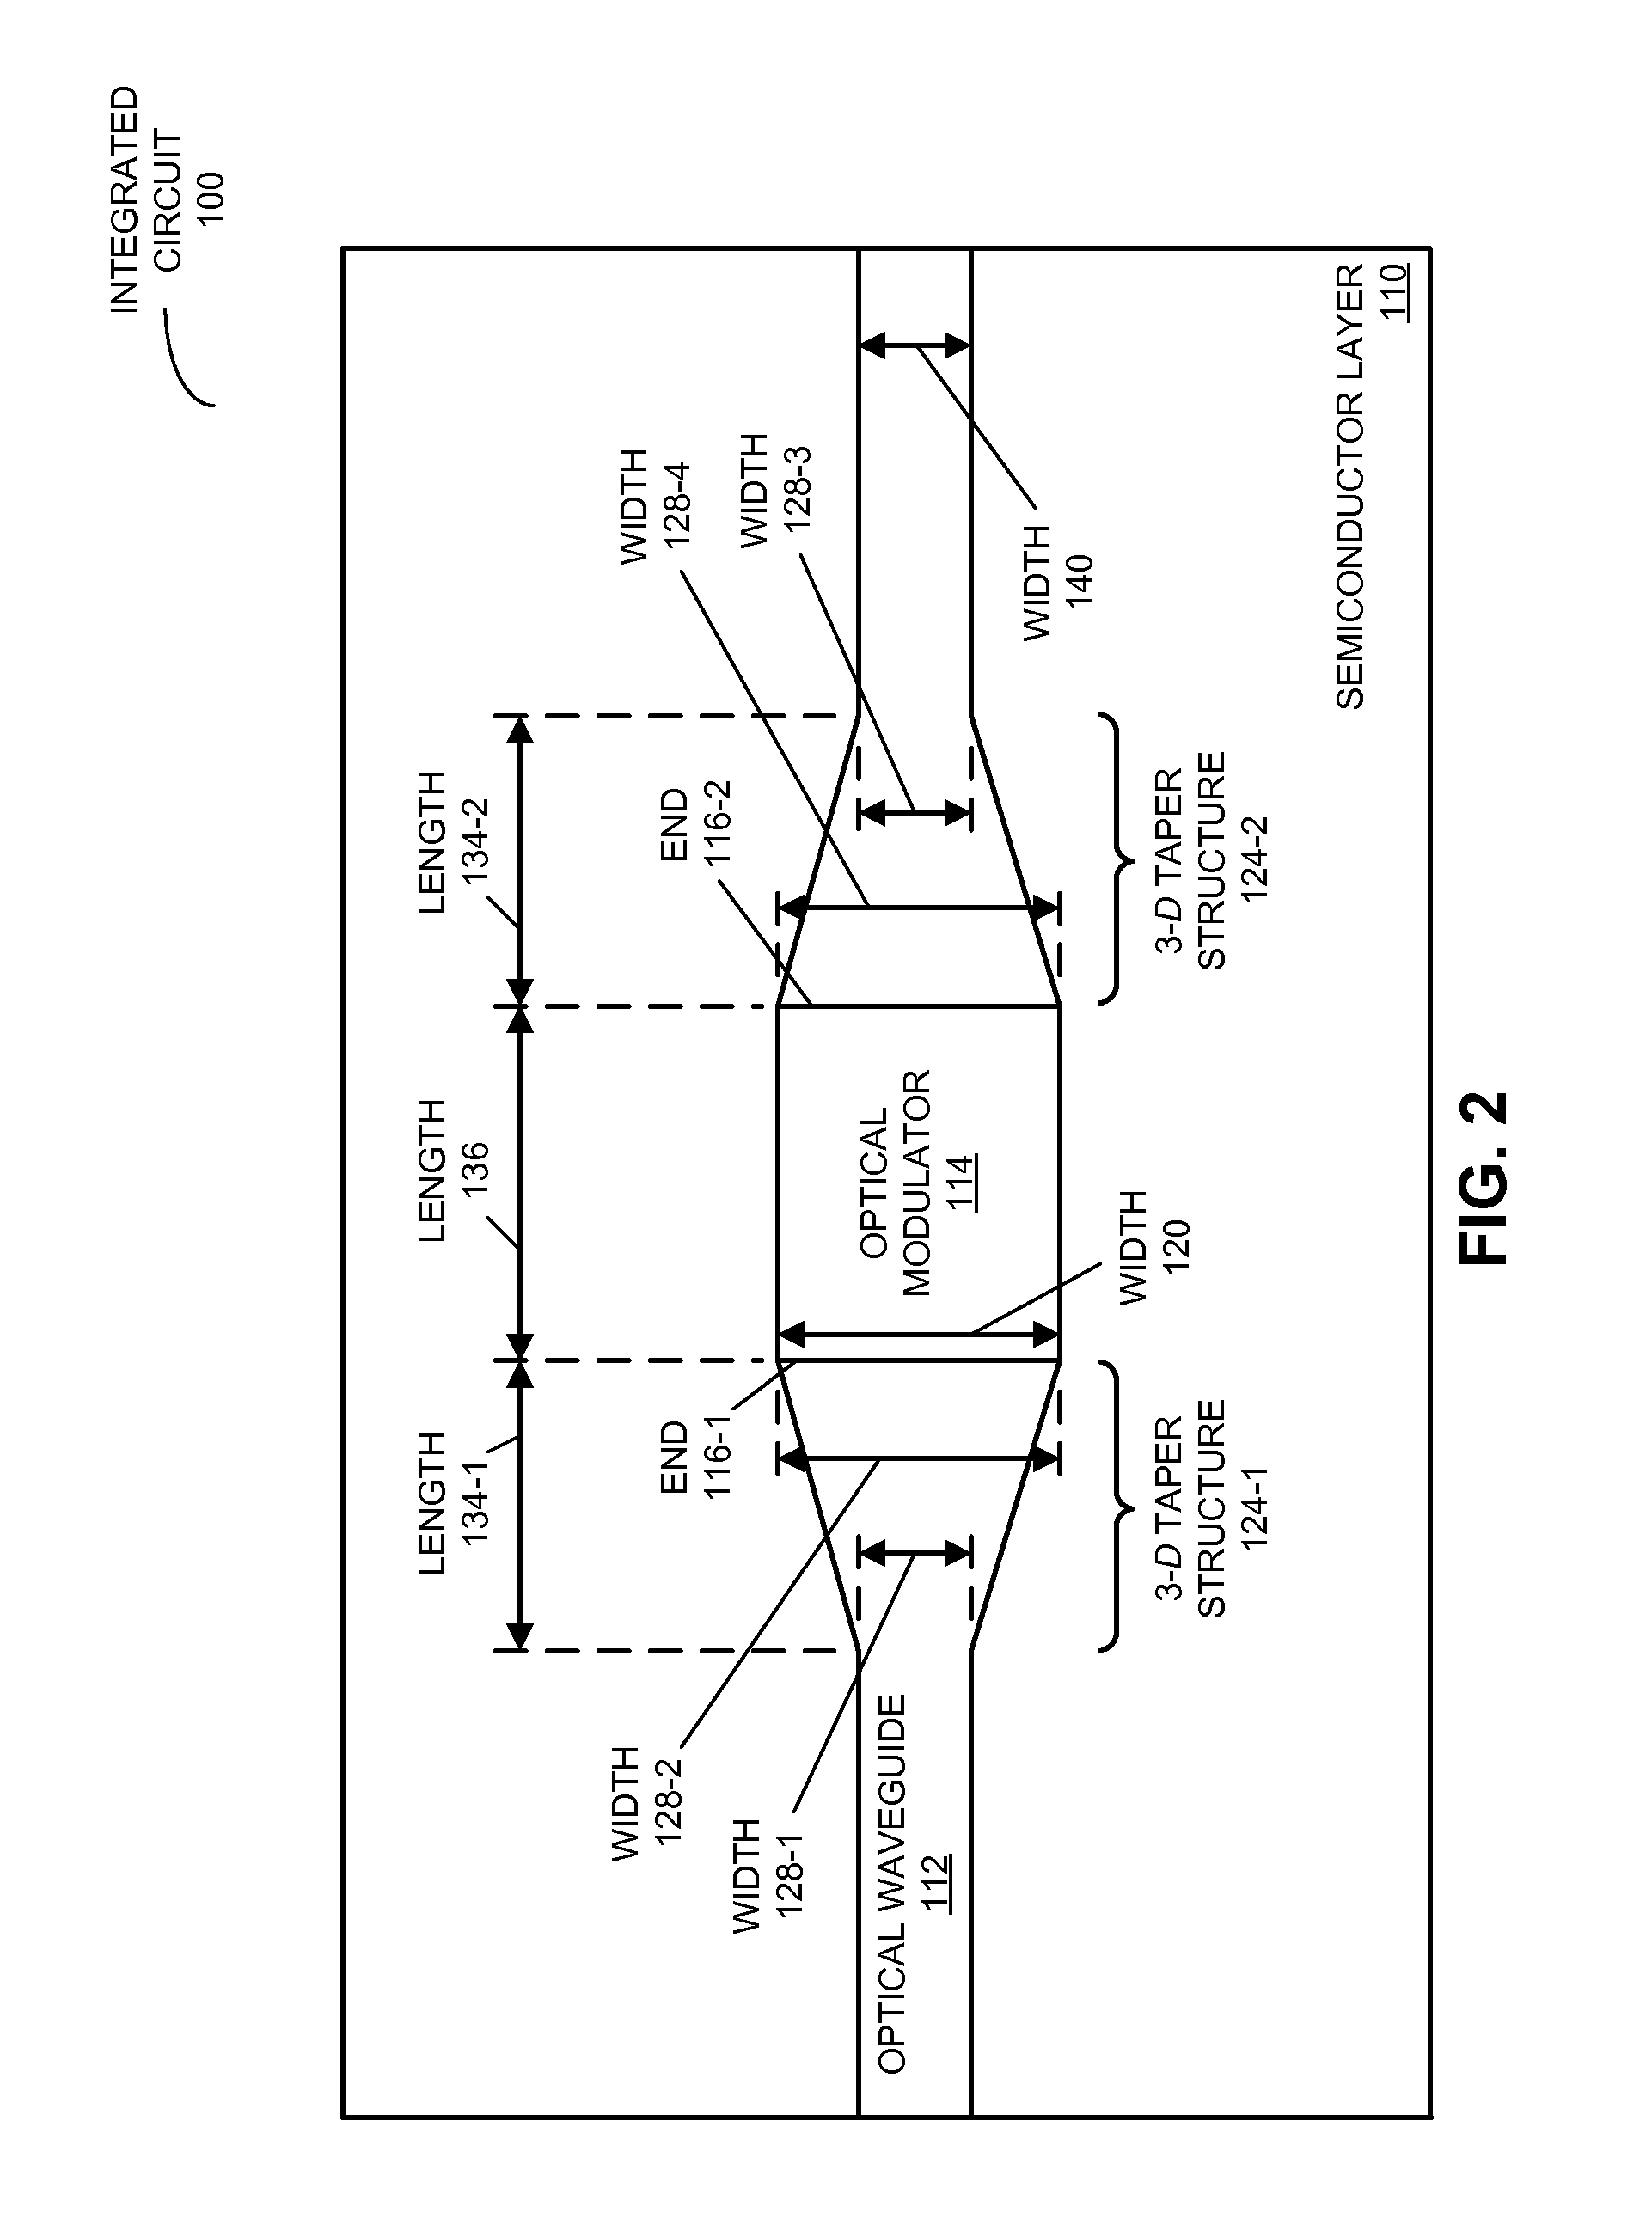 Optical modulator with three-dimensional waveguide tapers